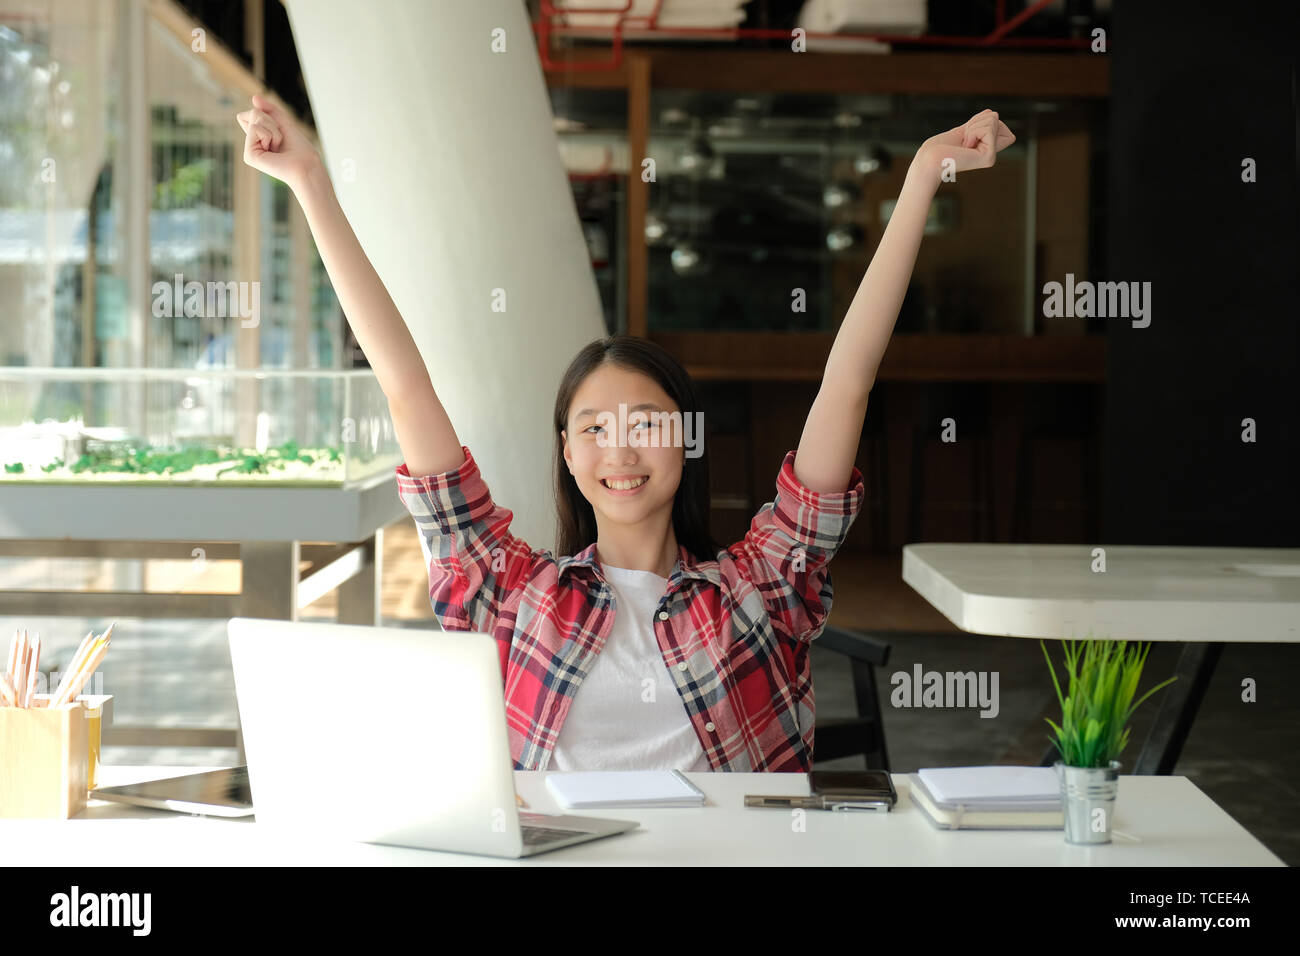 happy asian woman girl teenager raising hands with gladness happiness Stock Photo